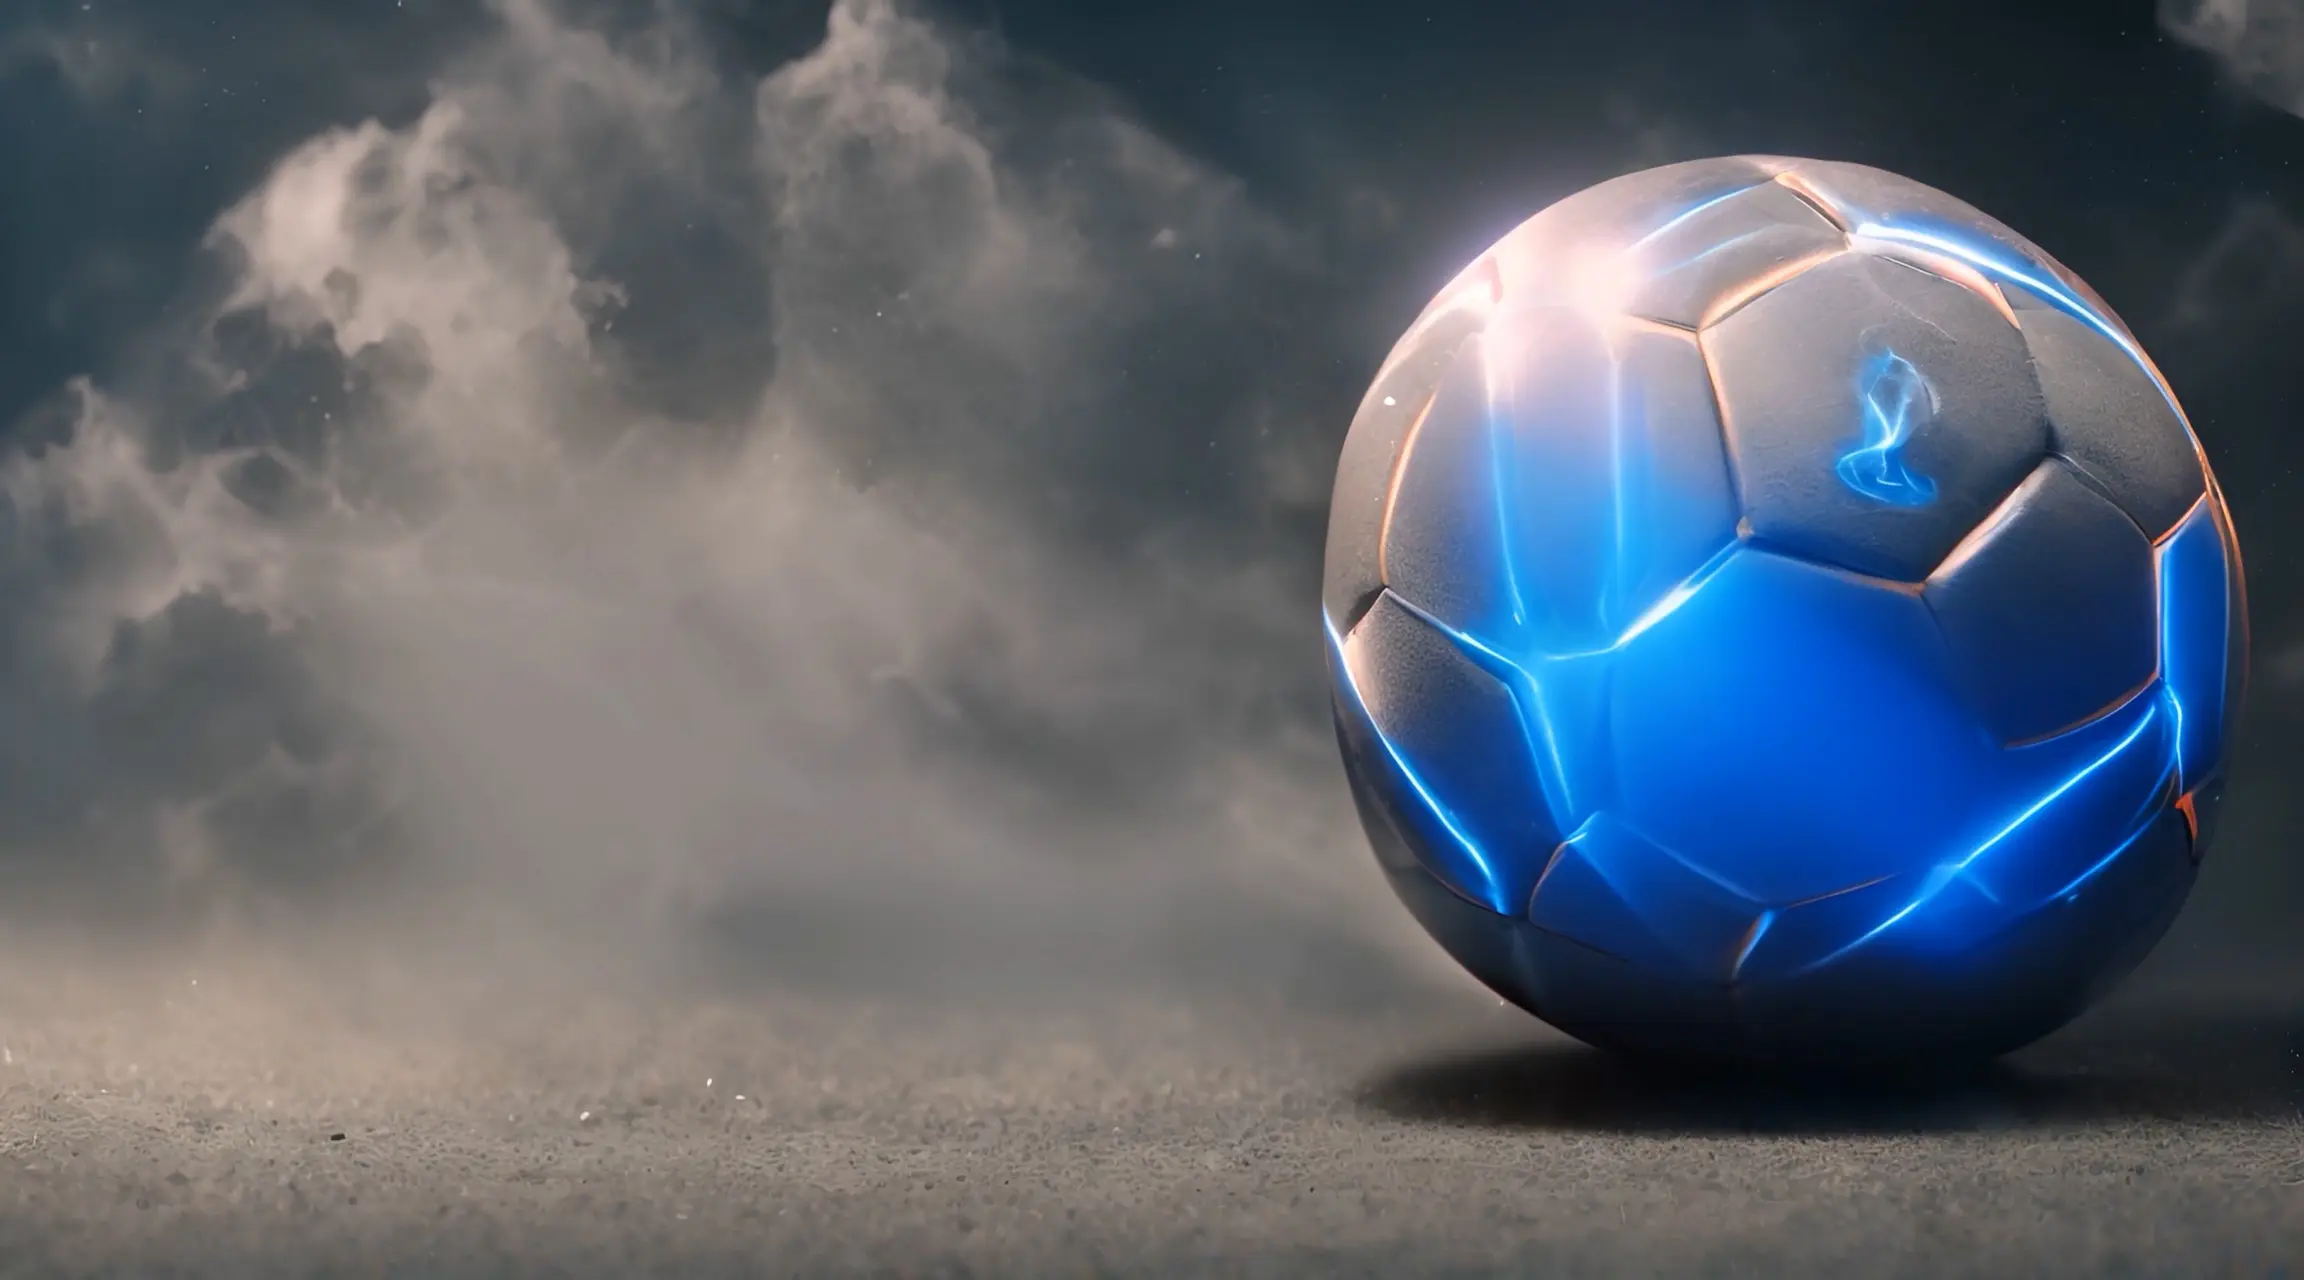 Glowing Sports Ball High Energy Video Backdrop